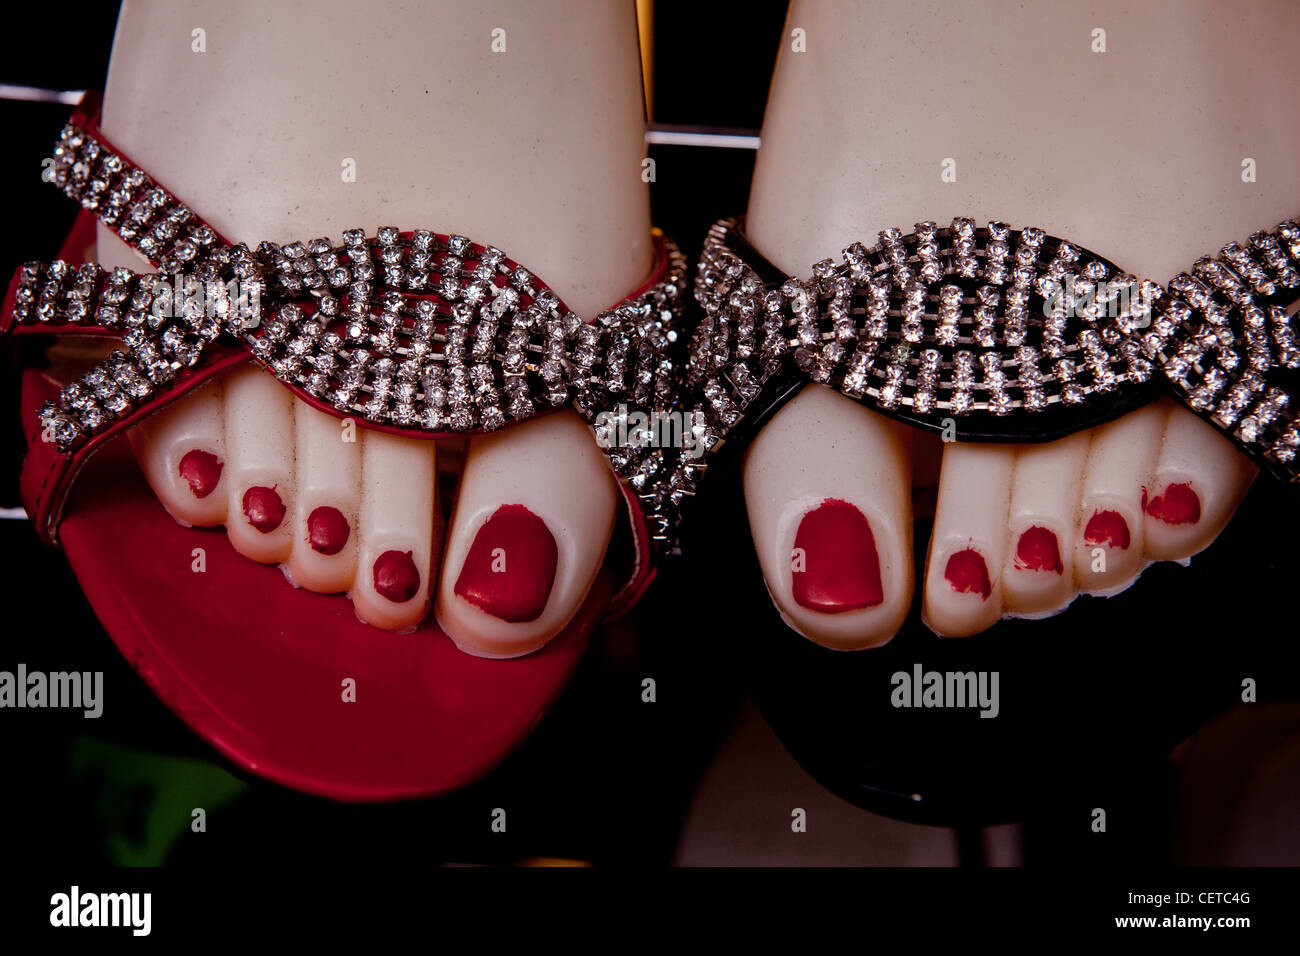 Mannequin's feet with painted toenails Stock Photo